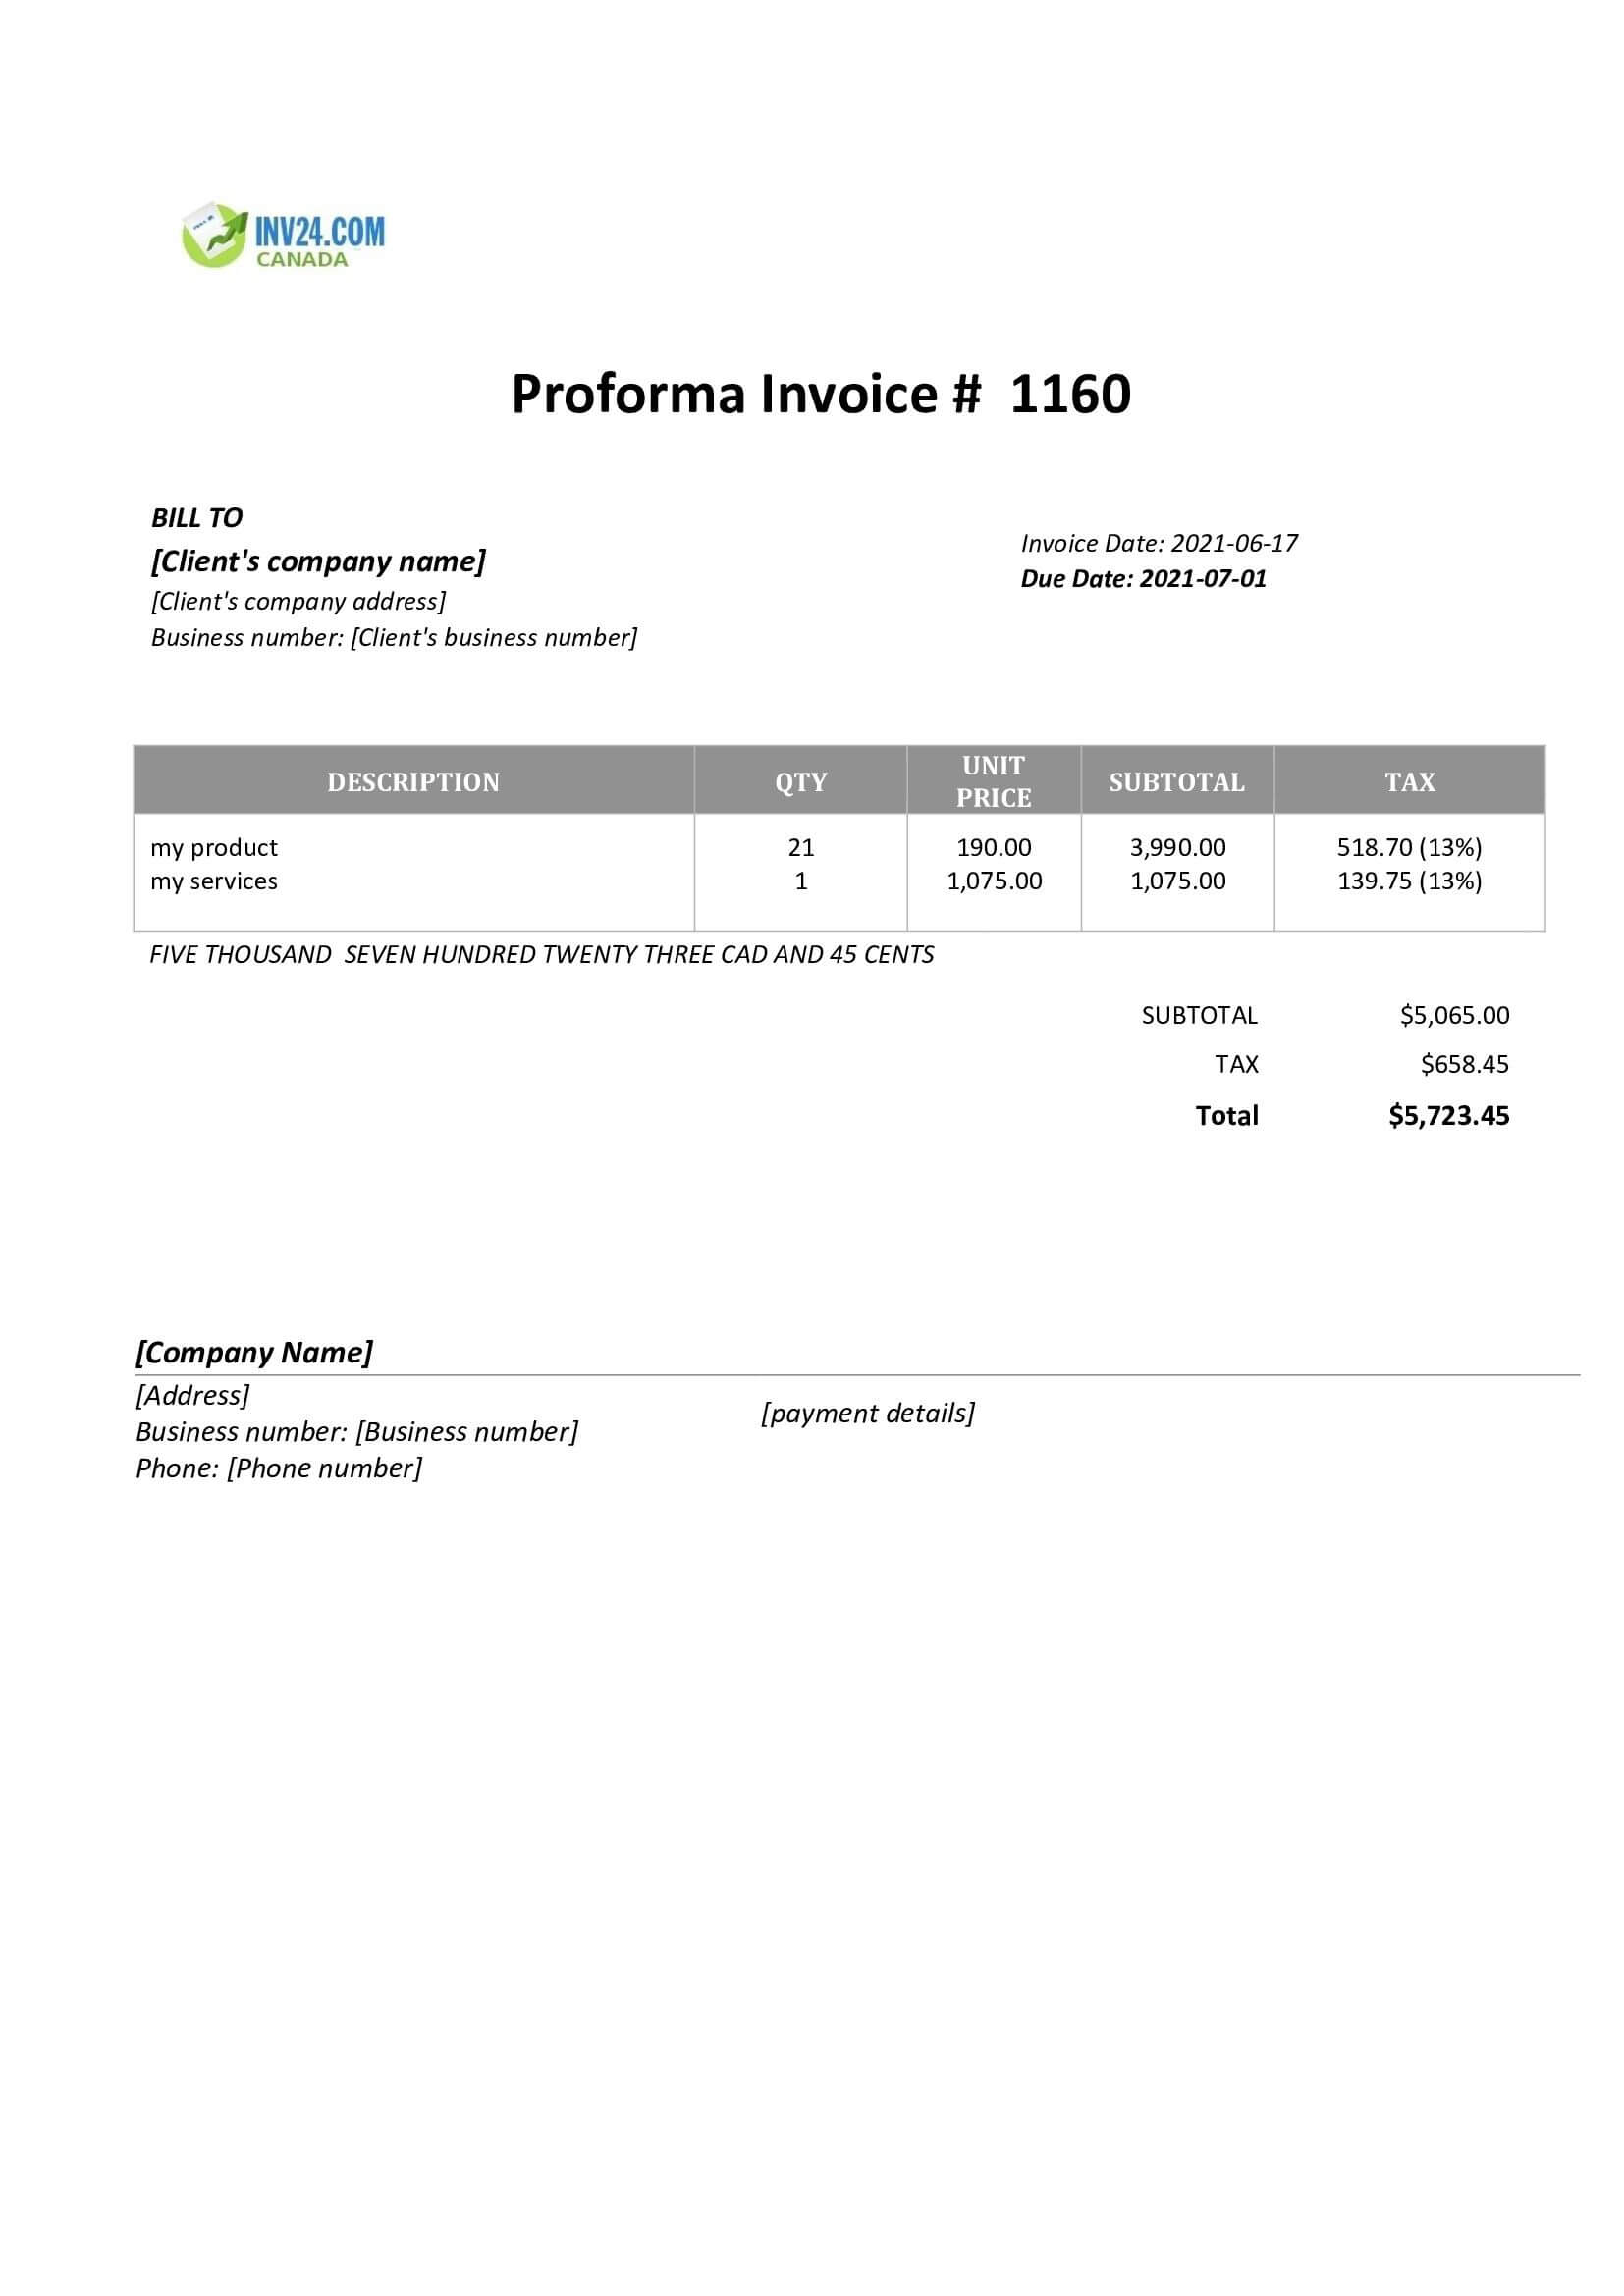 Proforma invoice for Canada Definition, Sample and Creation